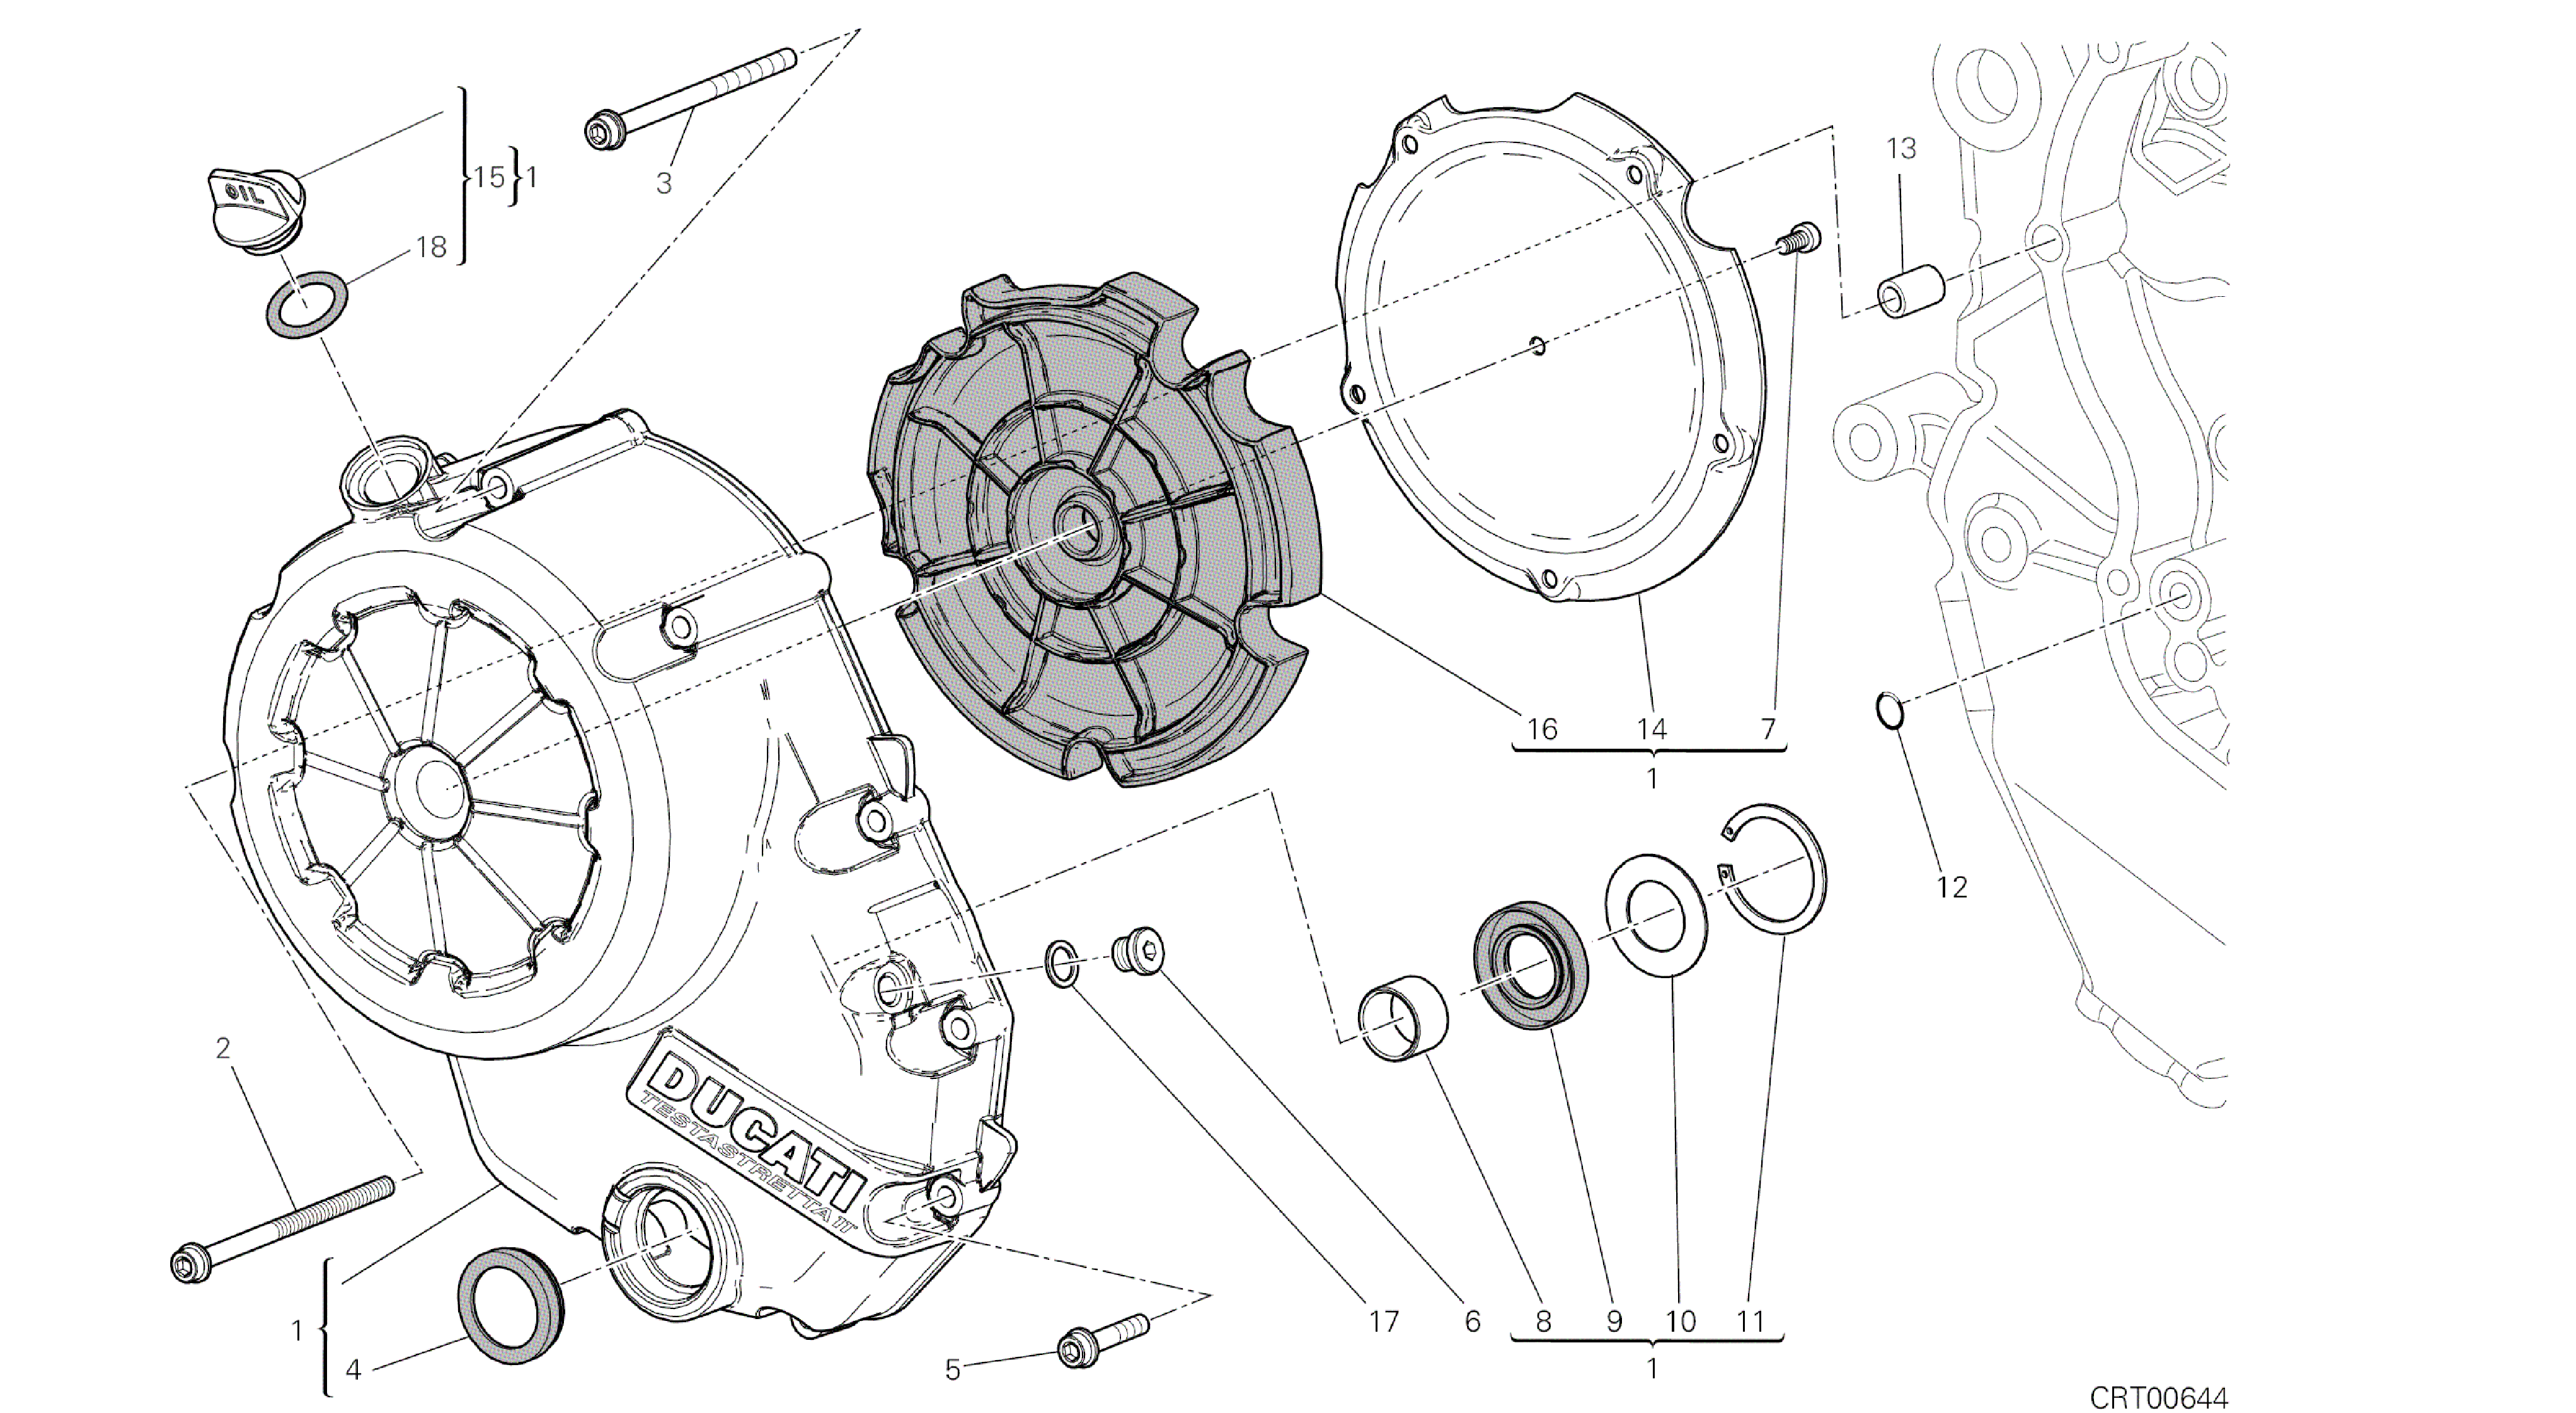 DRAWING 005 - CLUTCH COVER [MOD:DVL]GROUP ENGINE